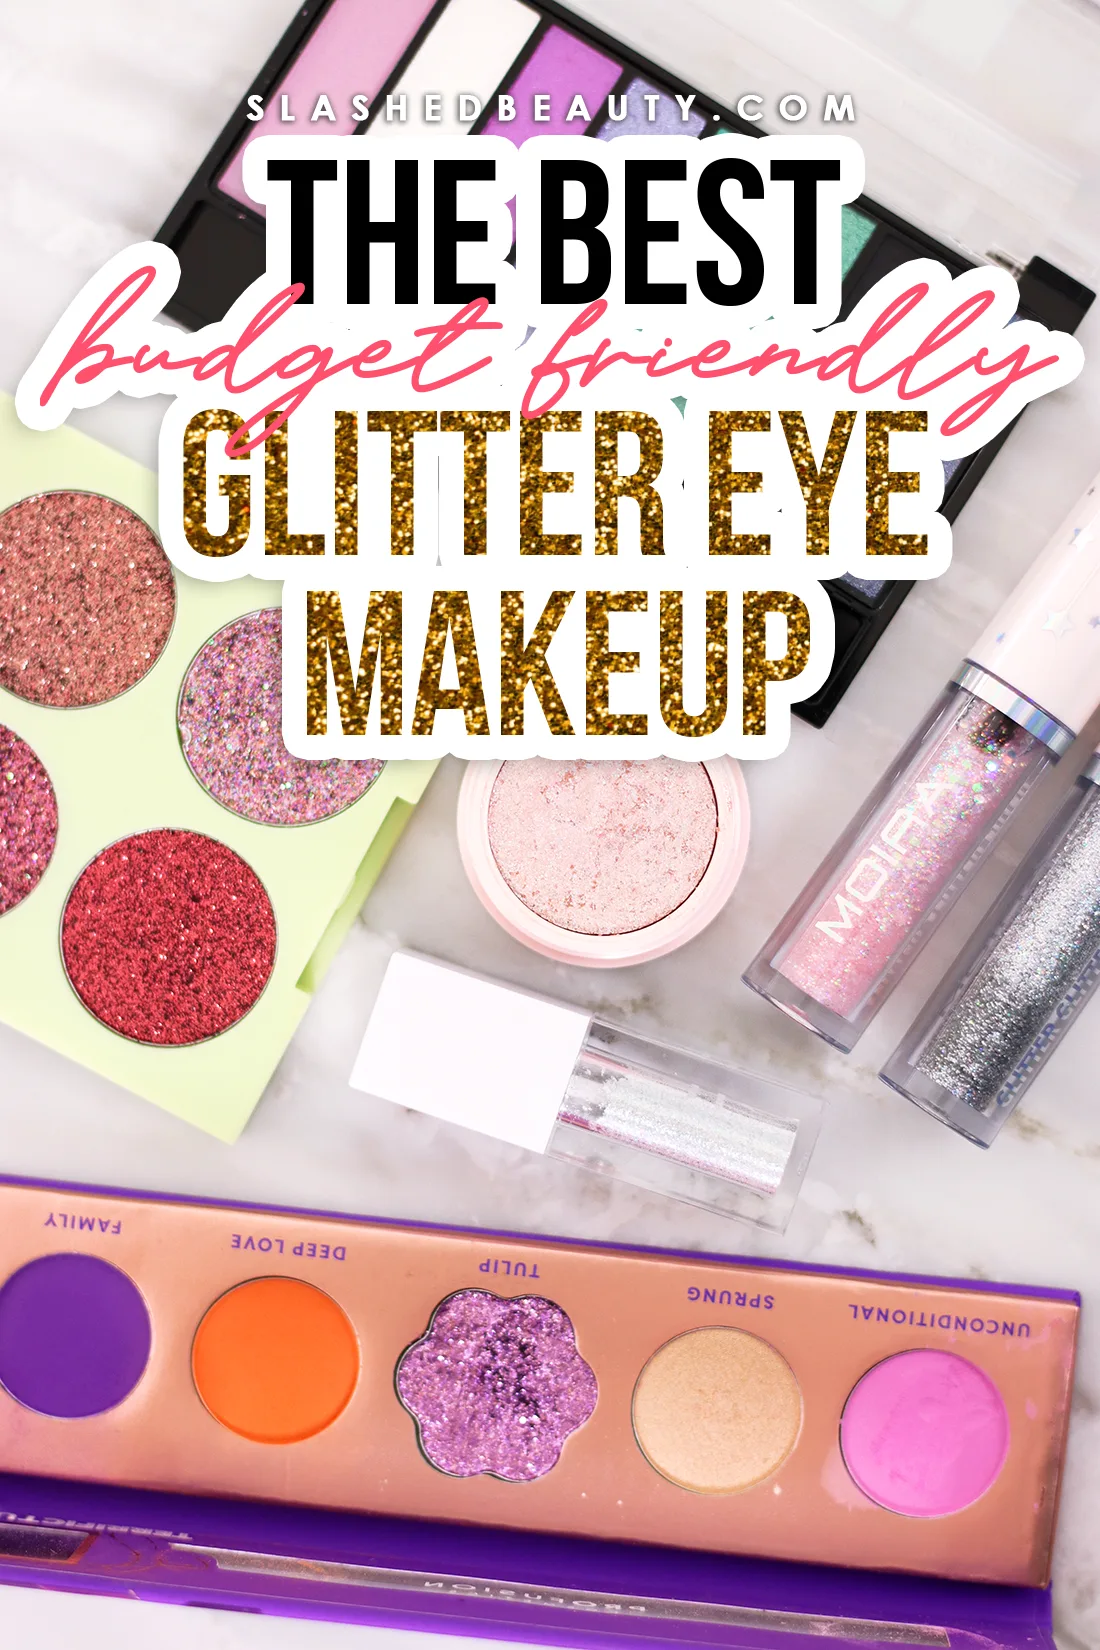 Various glitter makeup lying on a marble surface with text: The Best Budget Friendly Glitter Eye Makeup | Slashed Beauty